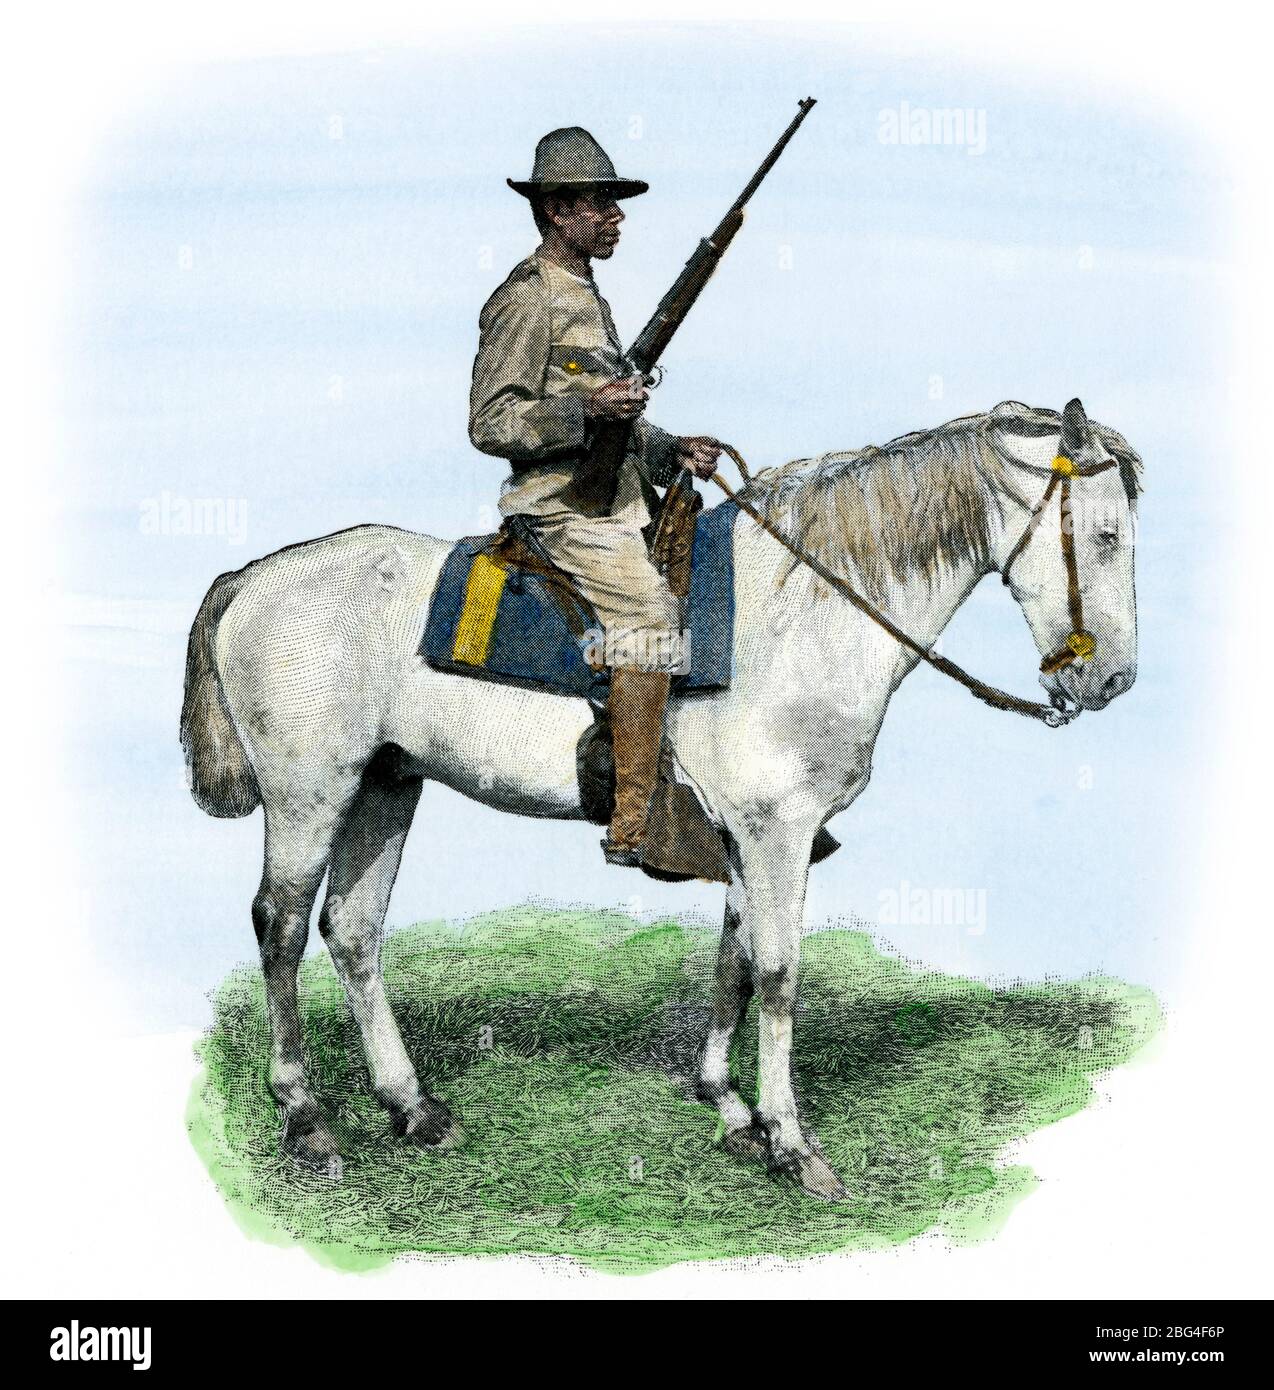 Rough Rider William Pollock, Pawnee Indian, Spanish-American War, 1898.  Hand-colored halftone of a photograph Stock Photo